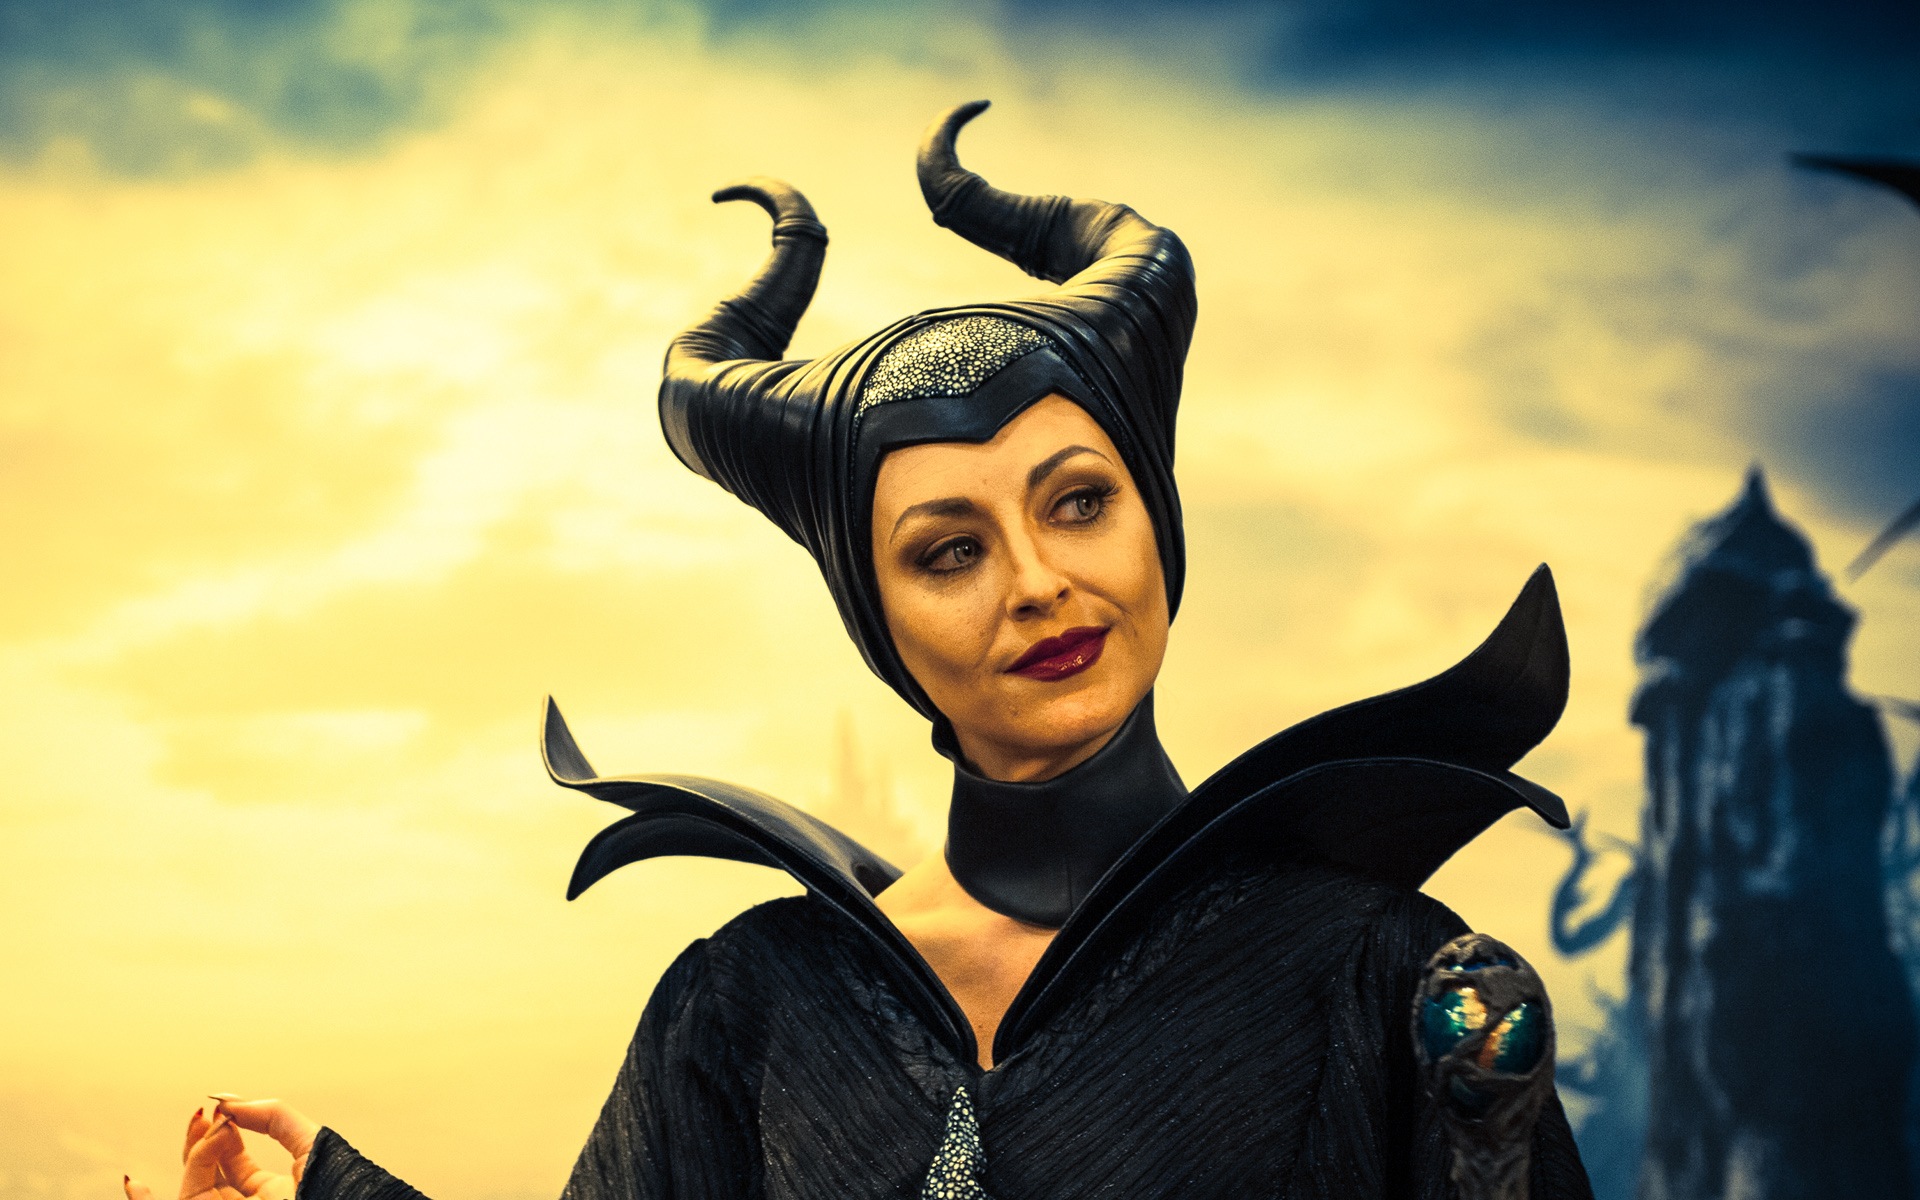 Maleficent 2014 HD movie wallpapers #15 - 1920x1200